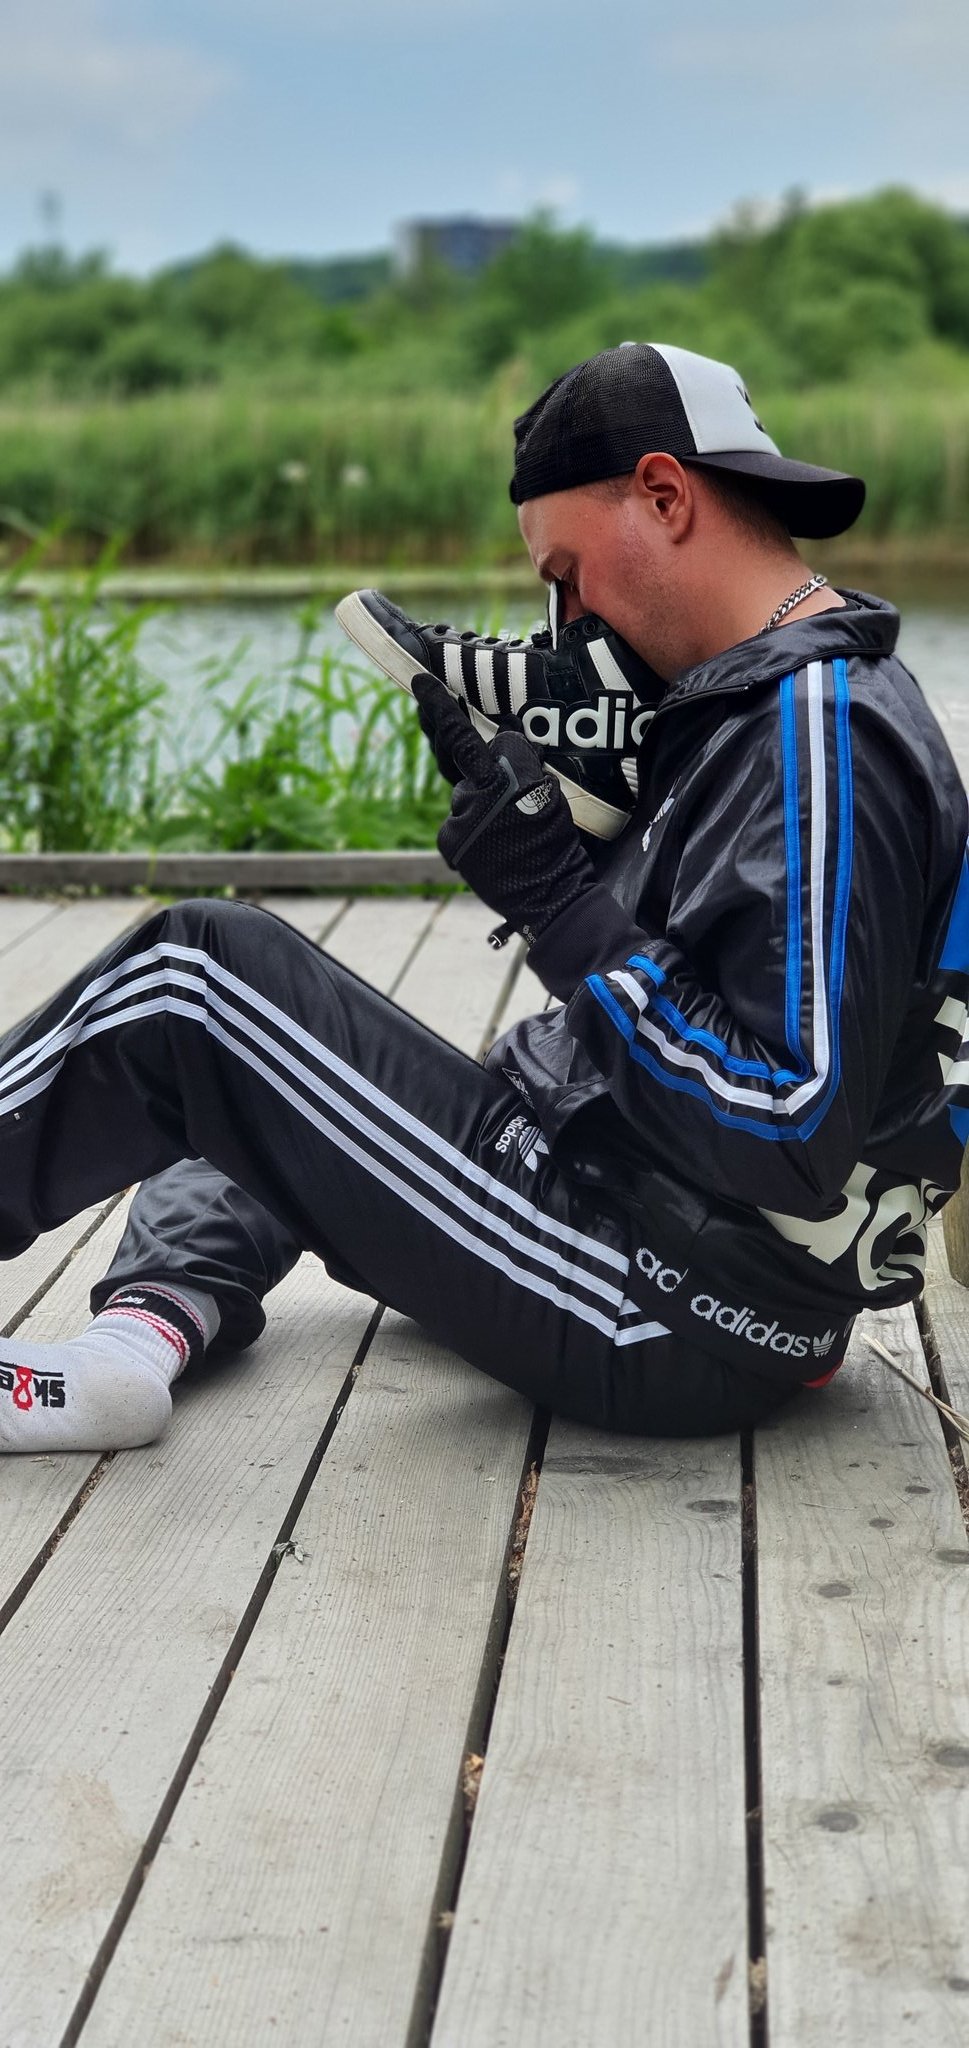 Gearfetishboy1989 on Twitter: "Wanna join? And smell my old Adidas high top? 😉 . . . . . . . . . . #adidasboy #adidas #sniffing #gay #sportswear #sneakers #scallygay #chile62 #boy #sneakerheads #sk8erboy #fetichepies https://t.co/8WWBBFUrBt" / Twitter